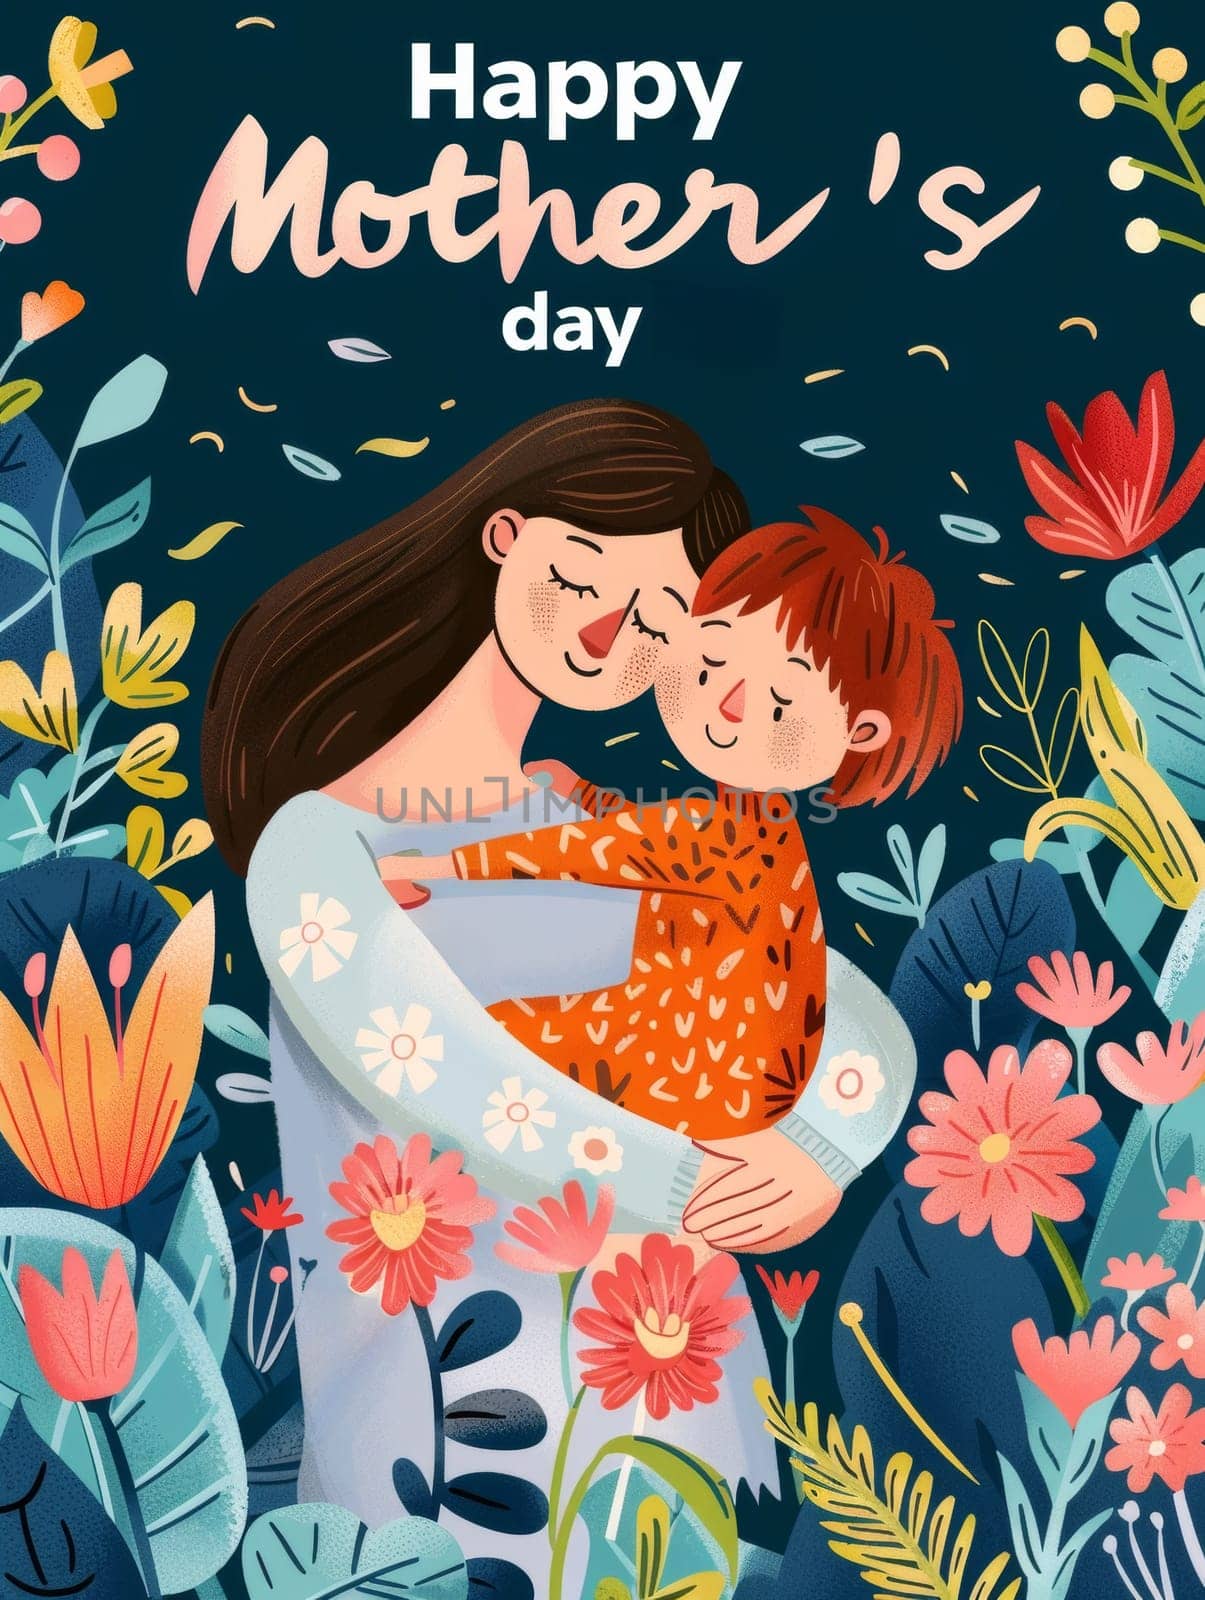 An affectionate illustration of a mother hugging her son amid a garden of red flowers, expressing the warmth of Mothers Day